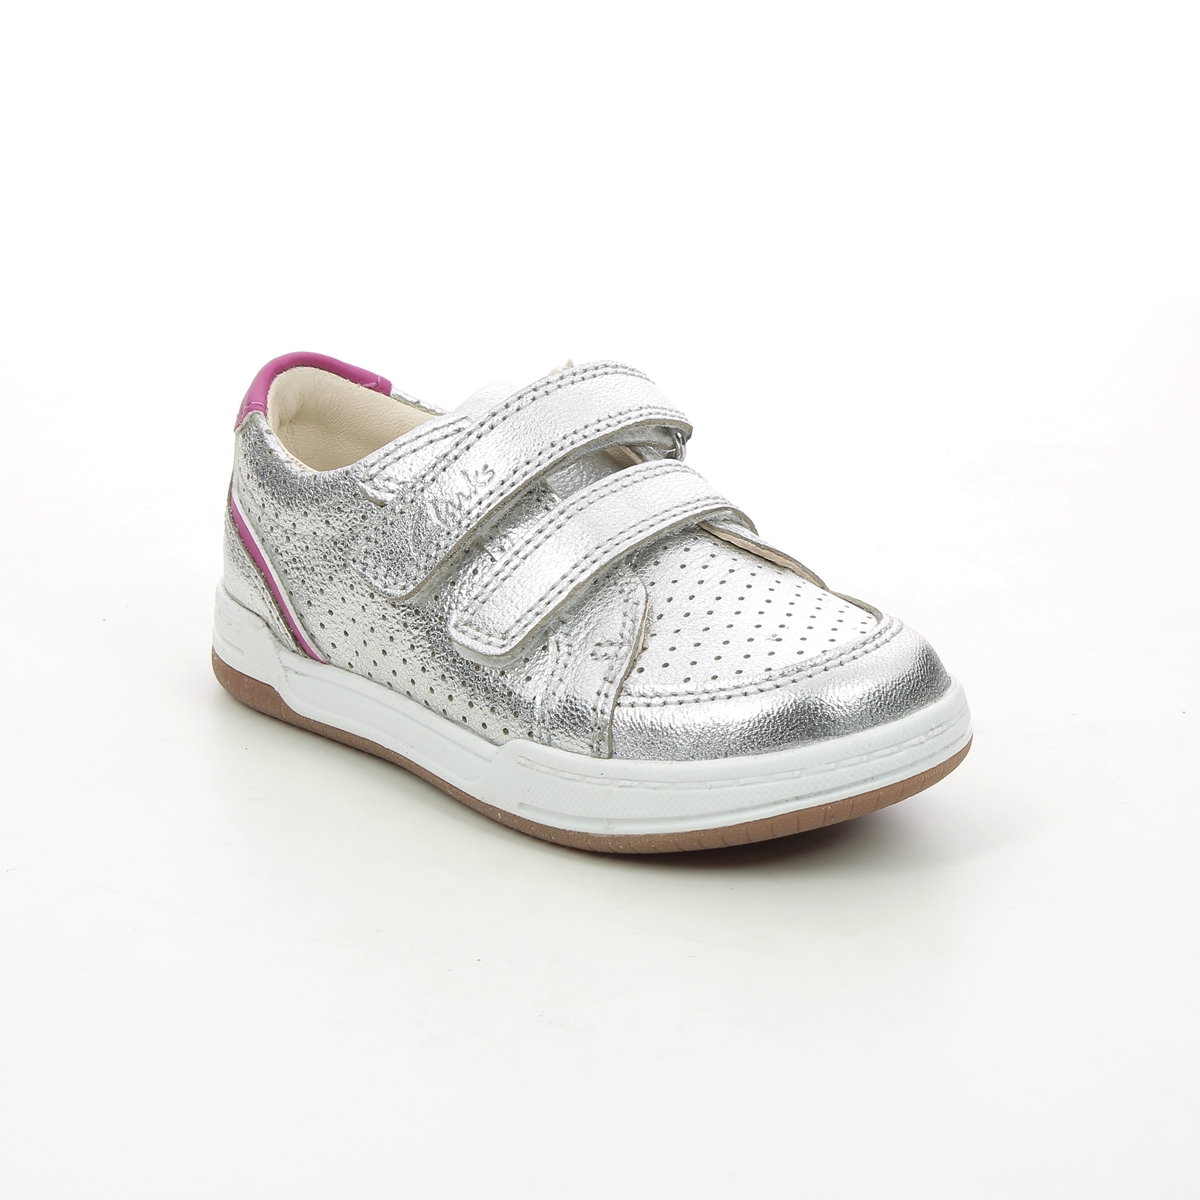 Clarks Fawn Solo T Silver Kids First And Toddler 624606F In Size 6.5 In Plain Silver F Width Fitting Regular Fit For kids